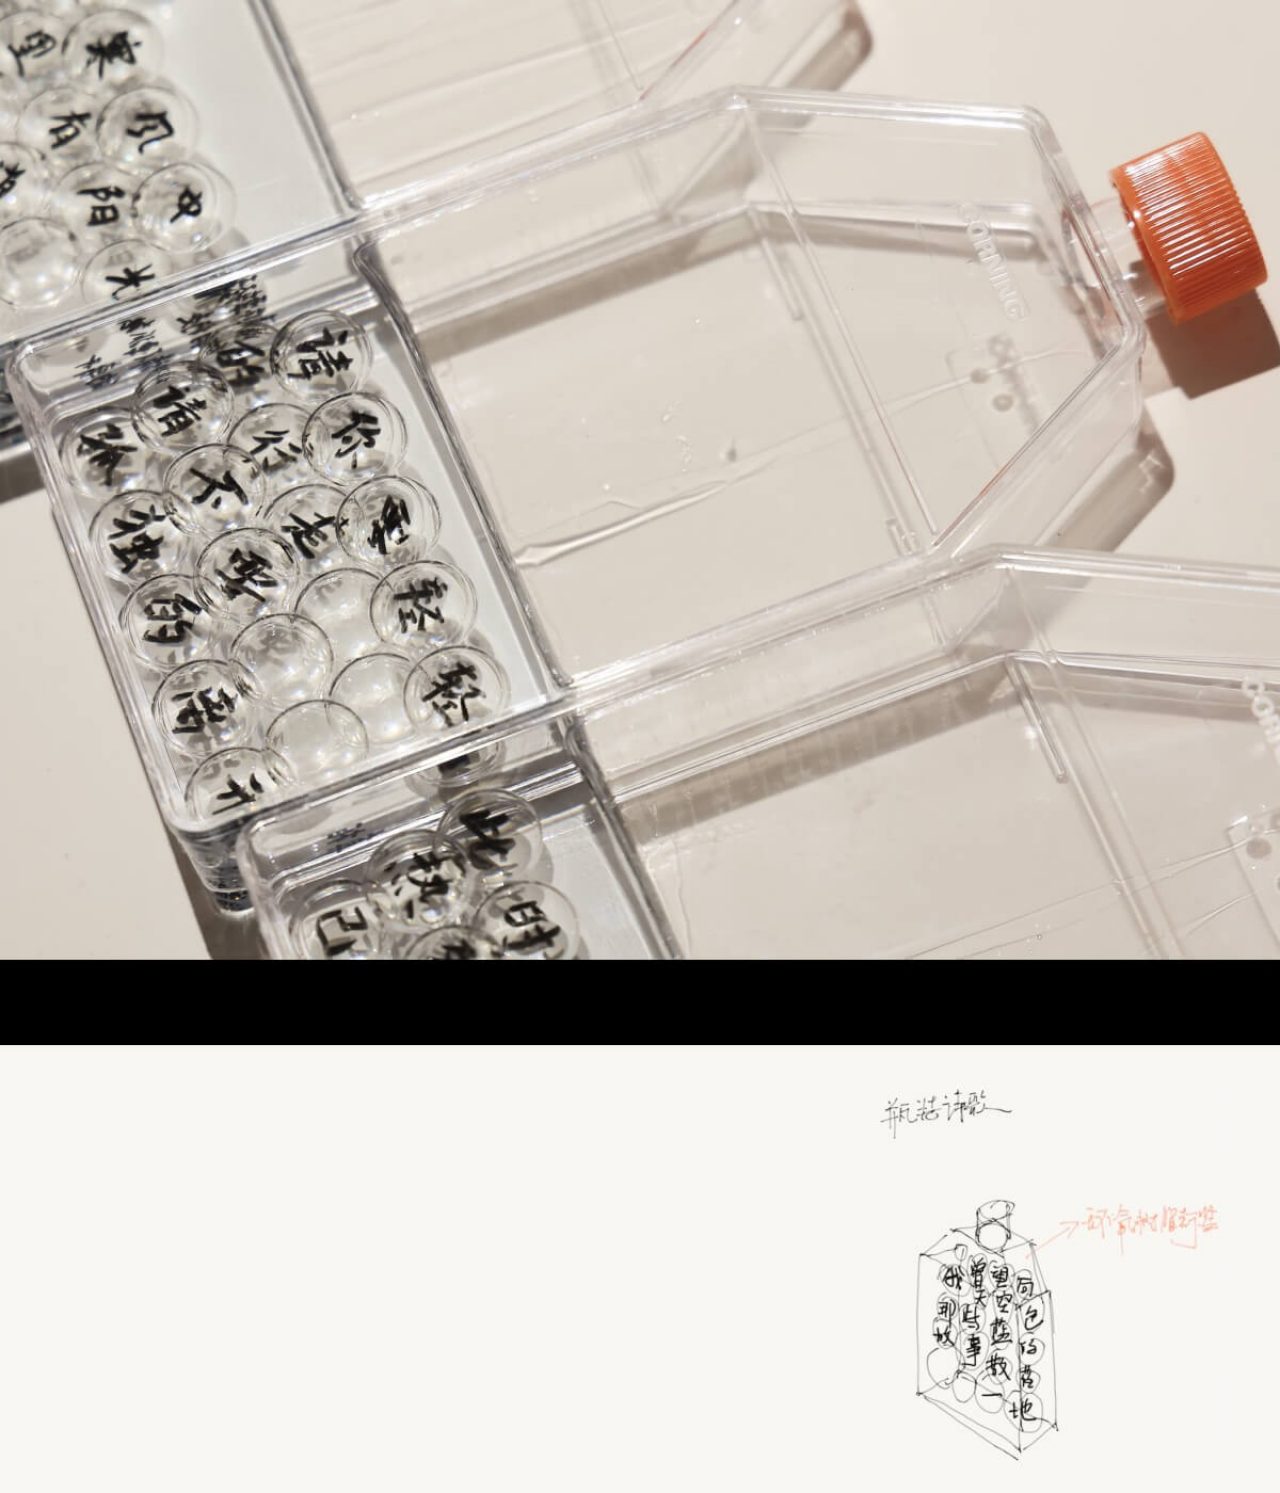 Clear glass beads etched with parts of the disassembled poem sit neatly inside a square bottle with an orange cap. The bottle is lying on it's side next to the other similar bottles.